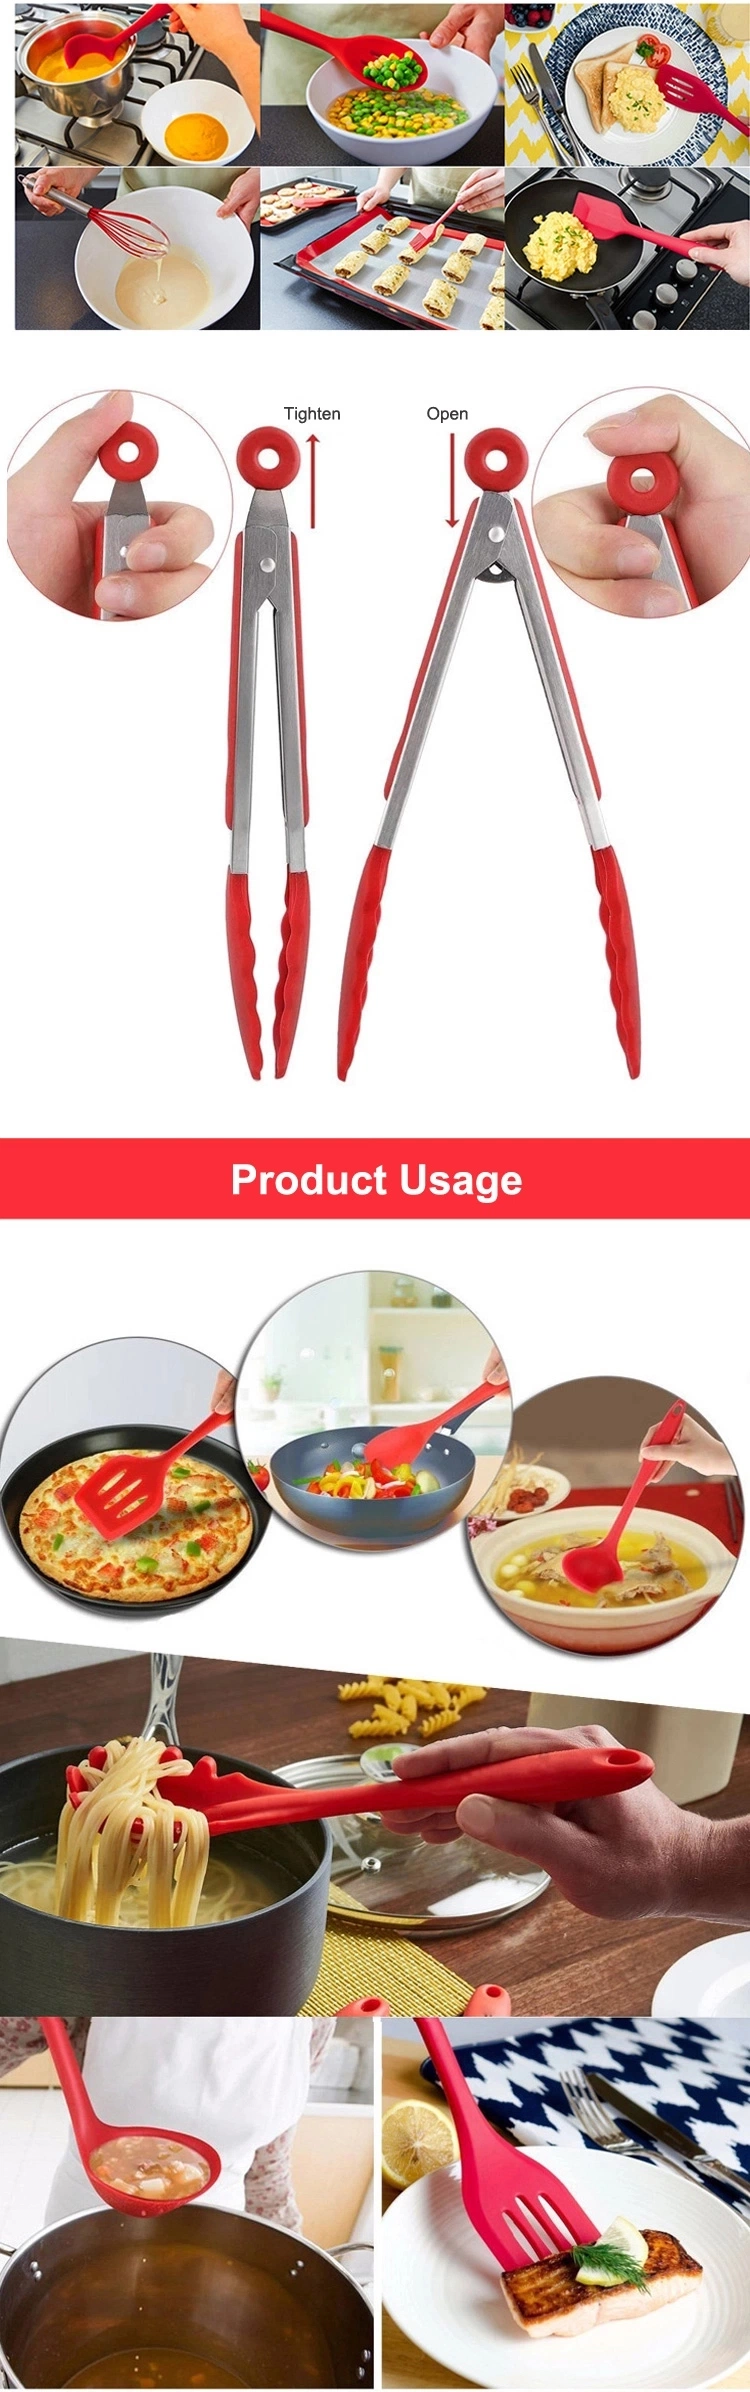 High Quality Colorful Silicone Kitchen Utensils Nonstick Cookware 10PCS Silicone Kitchen Tool with Colour Box